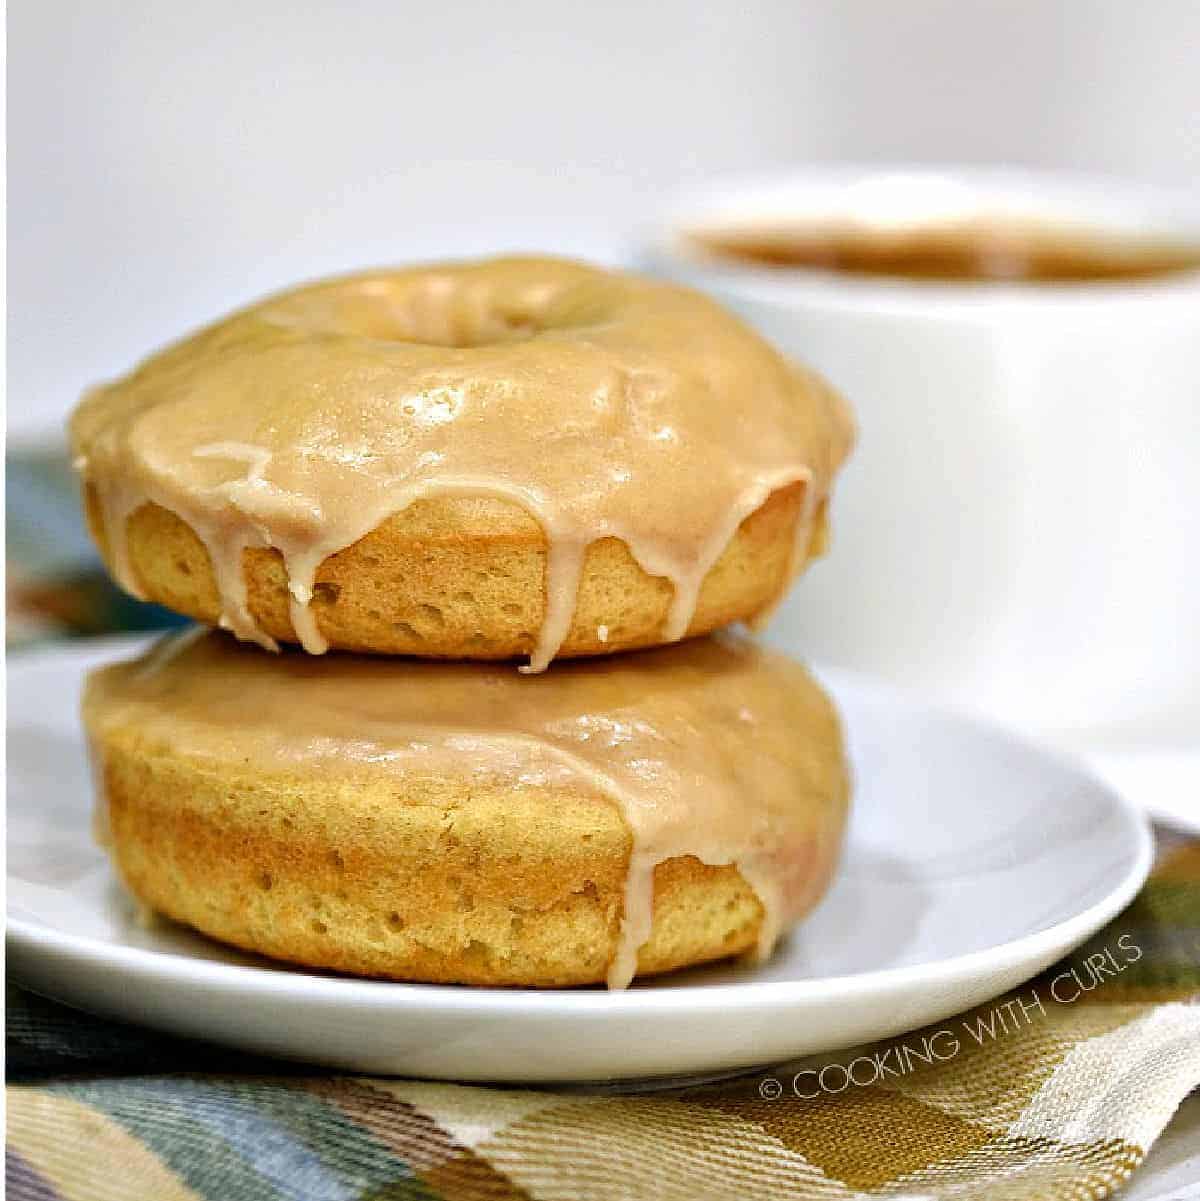 Two stacked maple glazed donuts on small white plate with a cup of coffee in background.